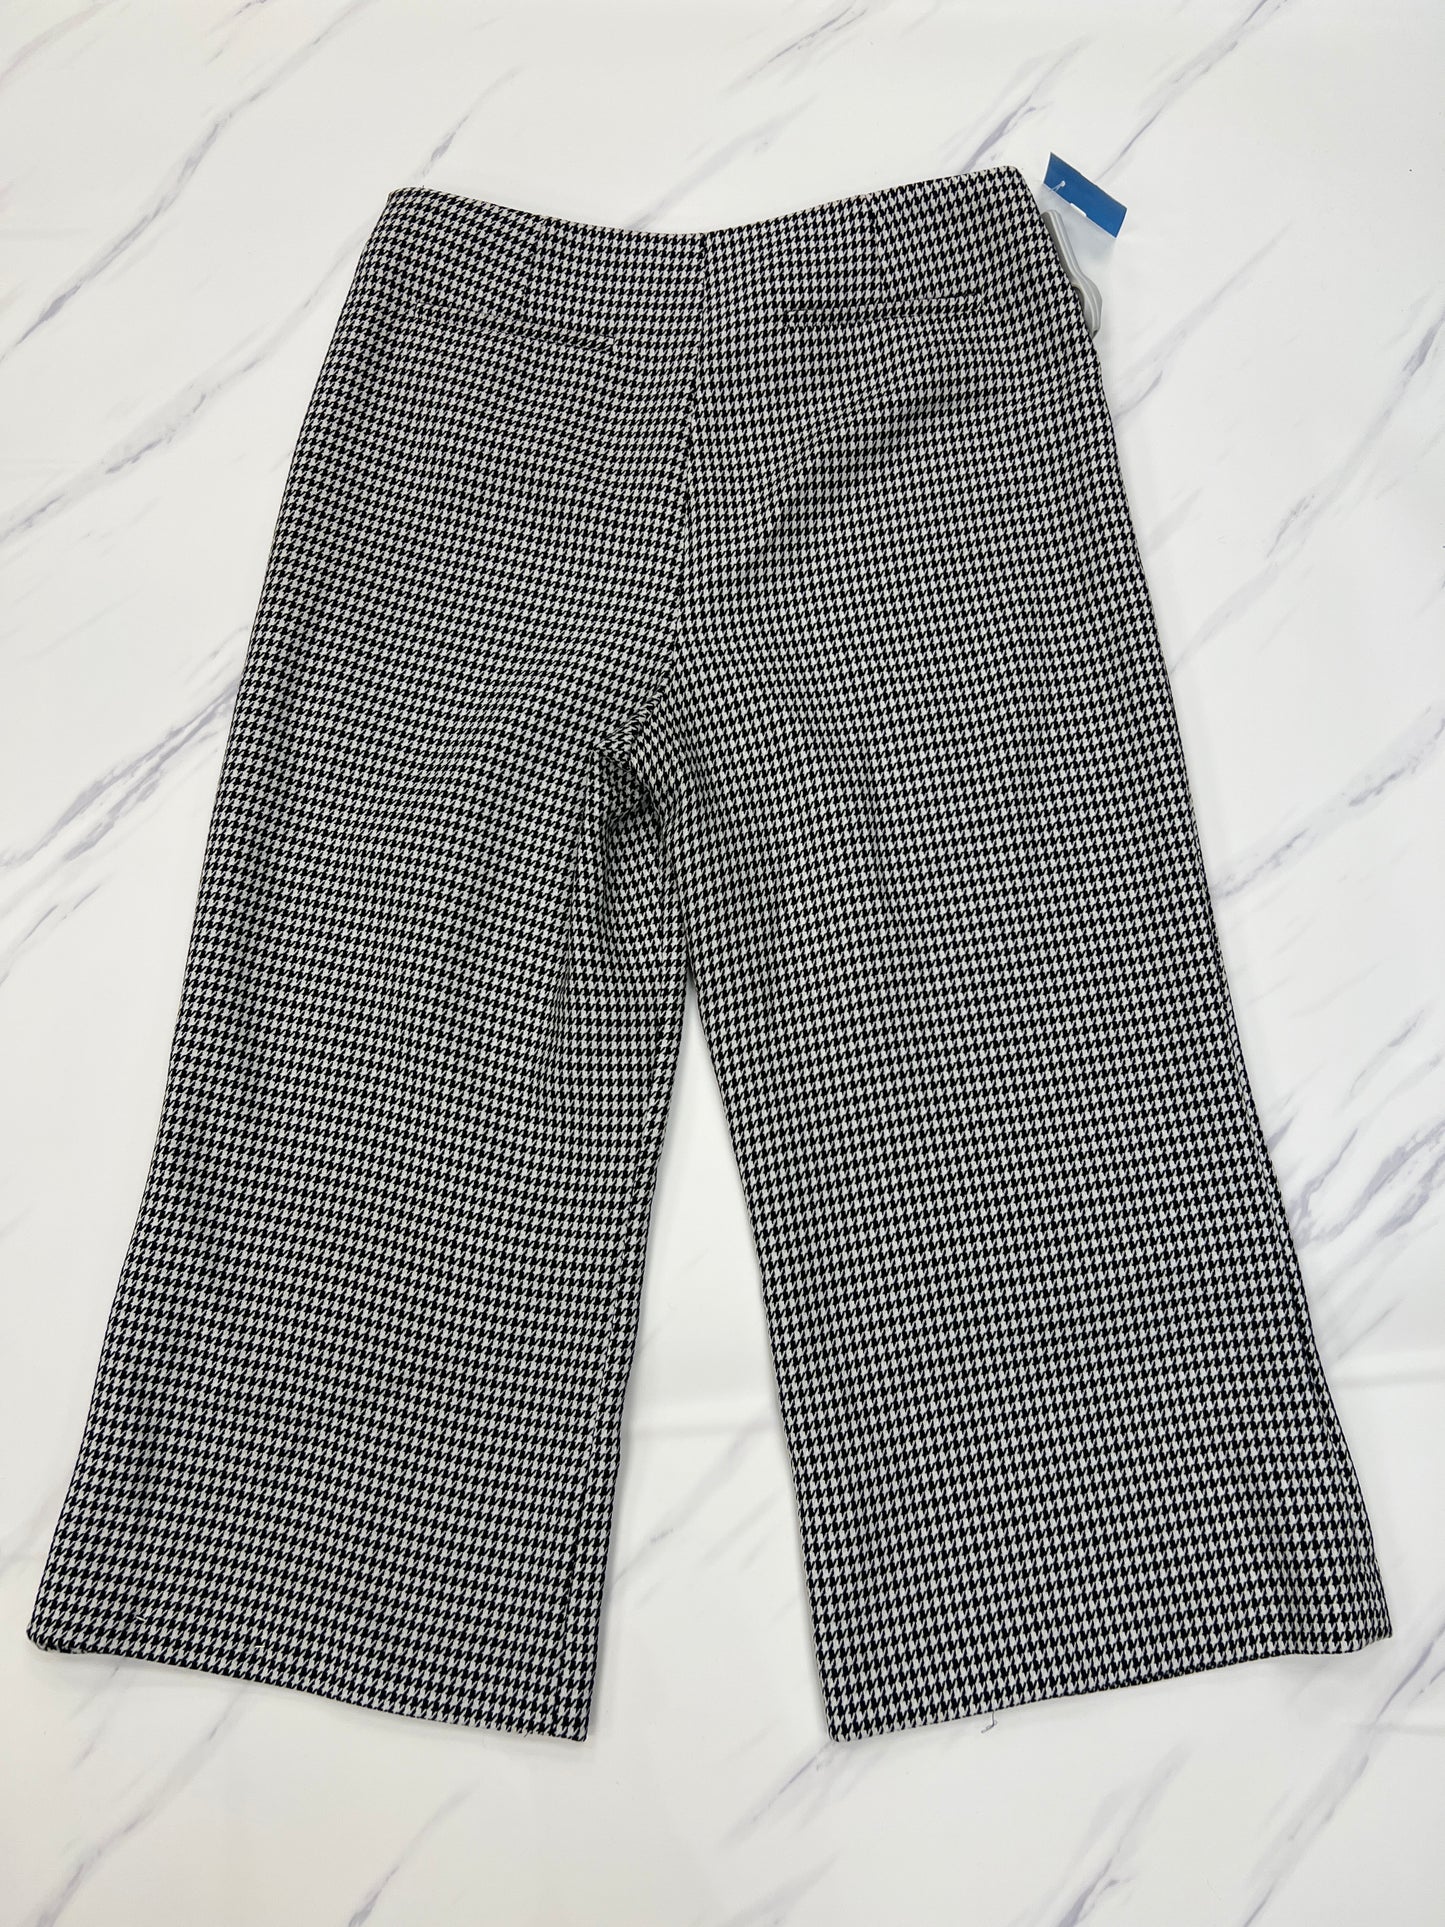 Pants Ankle By Gianni Bini  Size: 12